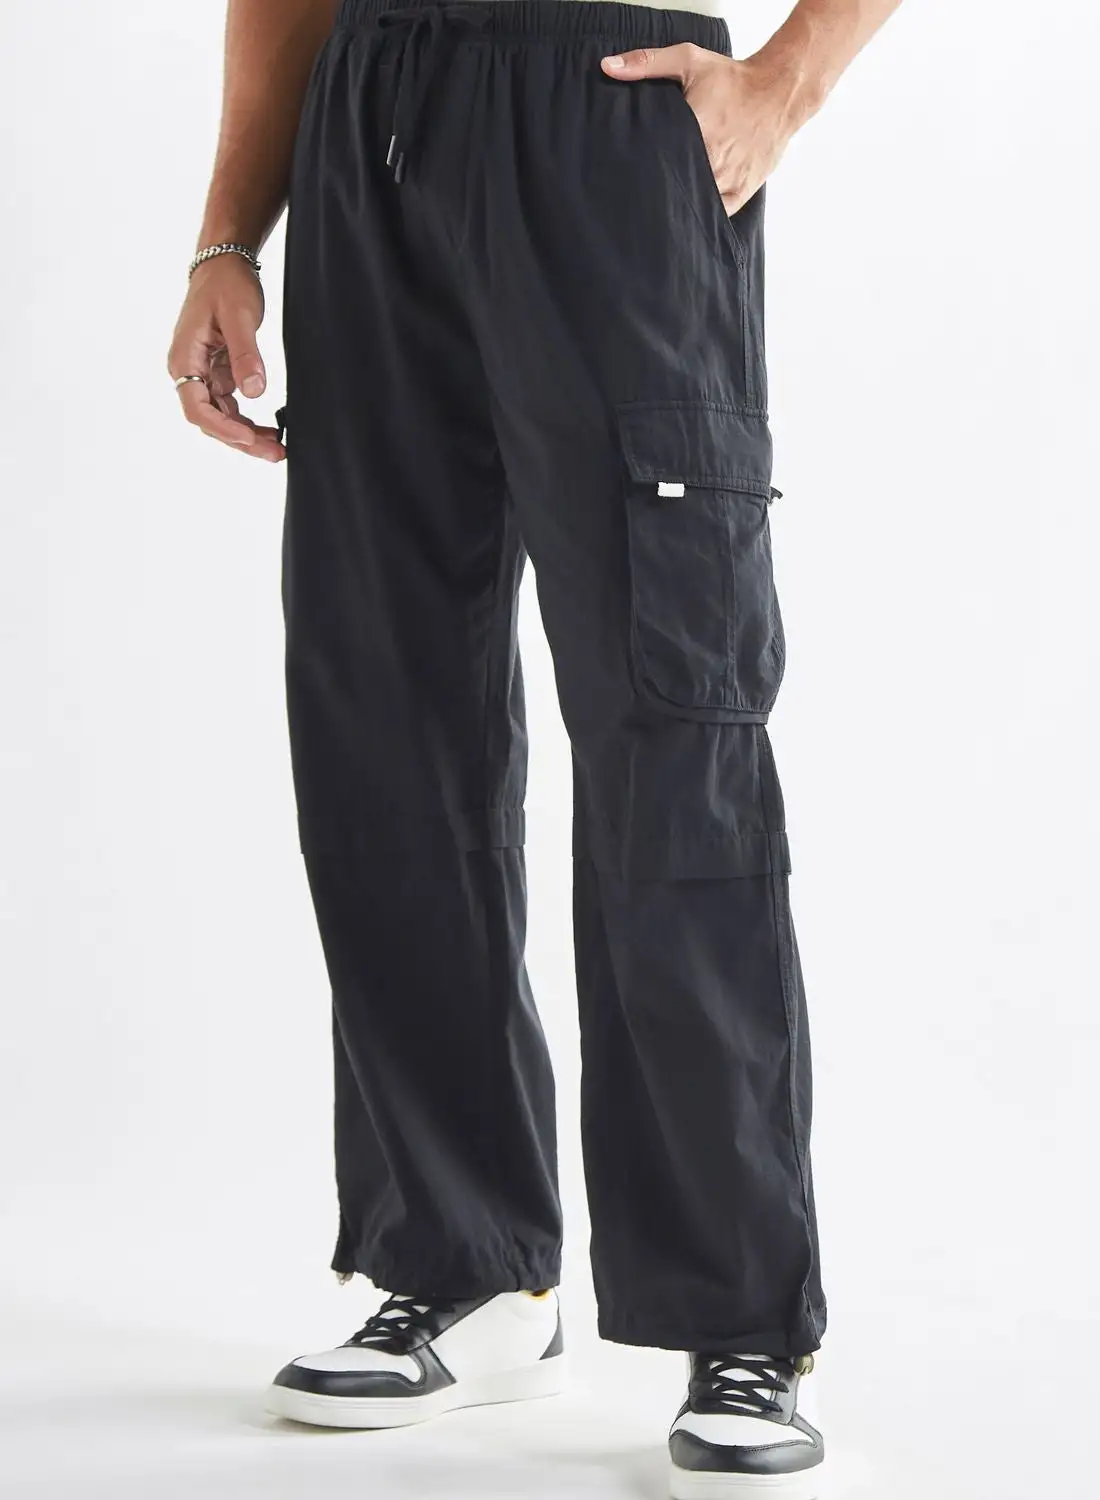 FAV Relaxed Fit Cargo Pants